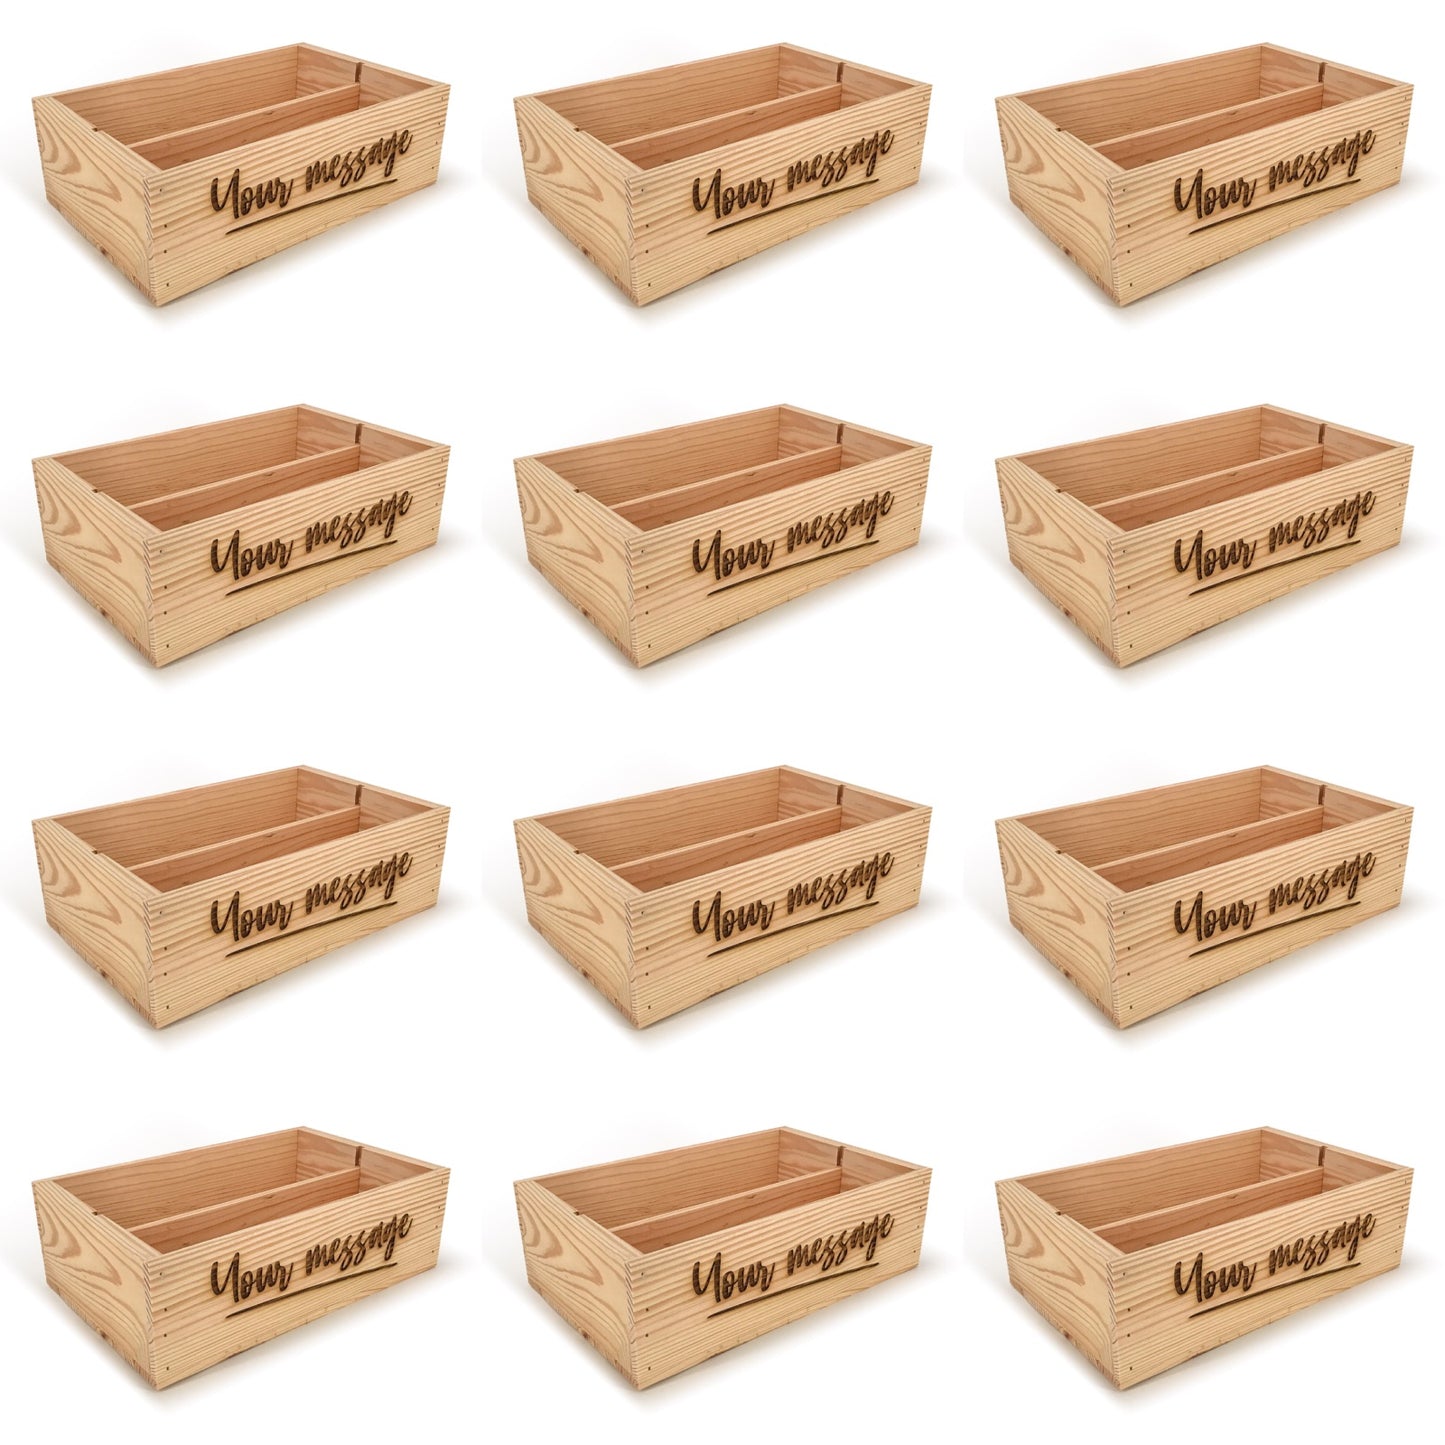 12 Two Bottle Wine Crate Boxes with Custom Message 14x9x4.5, 6-WB-14-9-4.5-ST-NW-NL,  12-WB-14-9-4.5-ST-NW-NL,  24-WB-14-9-4.5-ST-NW-NL,  48-WB-14-9-4.5-ST-NW-NL,  96-WB-14-9-4.5-ST-NW-NL